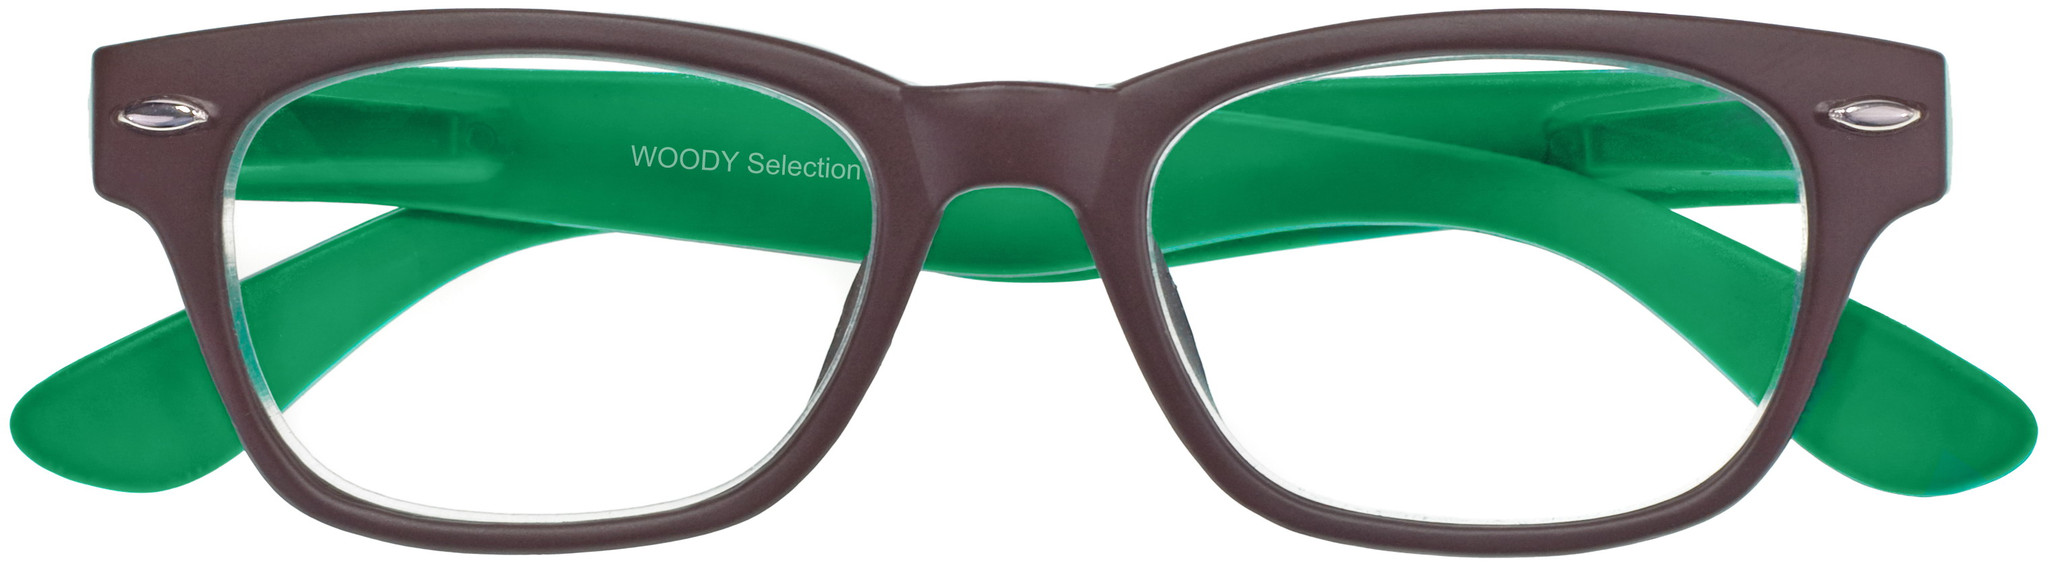 Woody Selection Grey-Green Readers by I Need You Readers